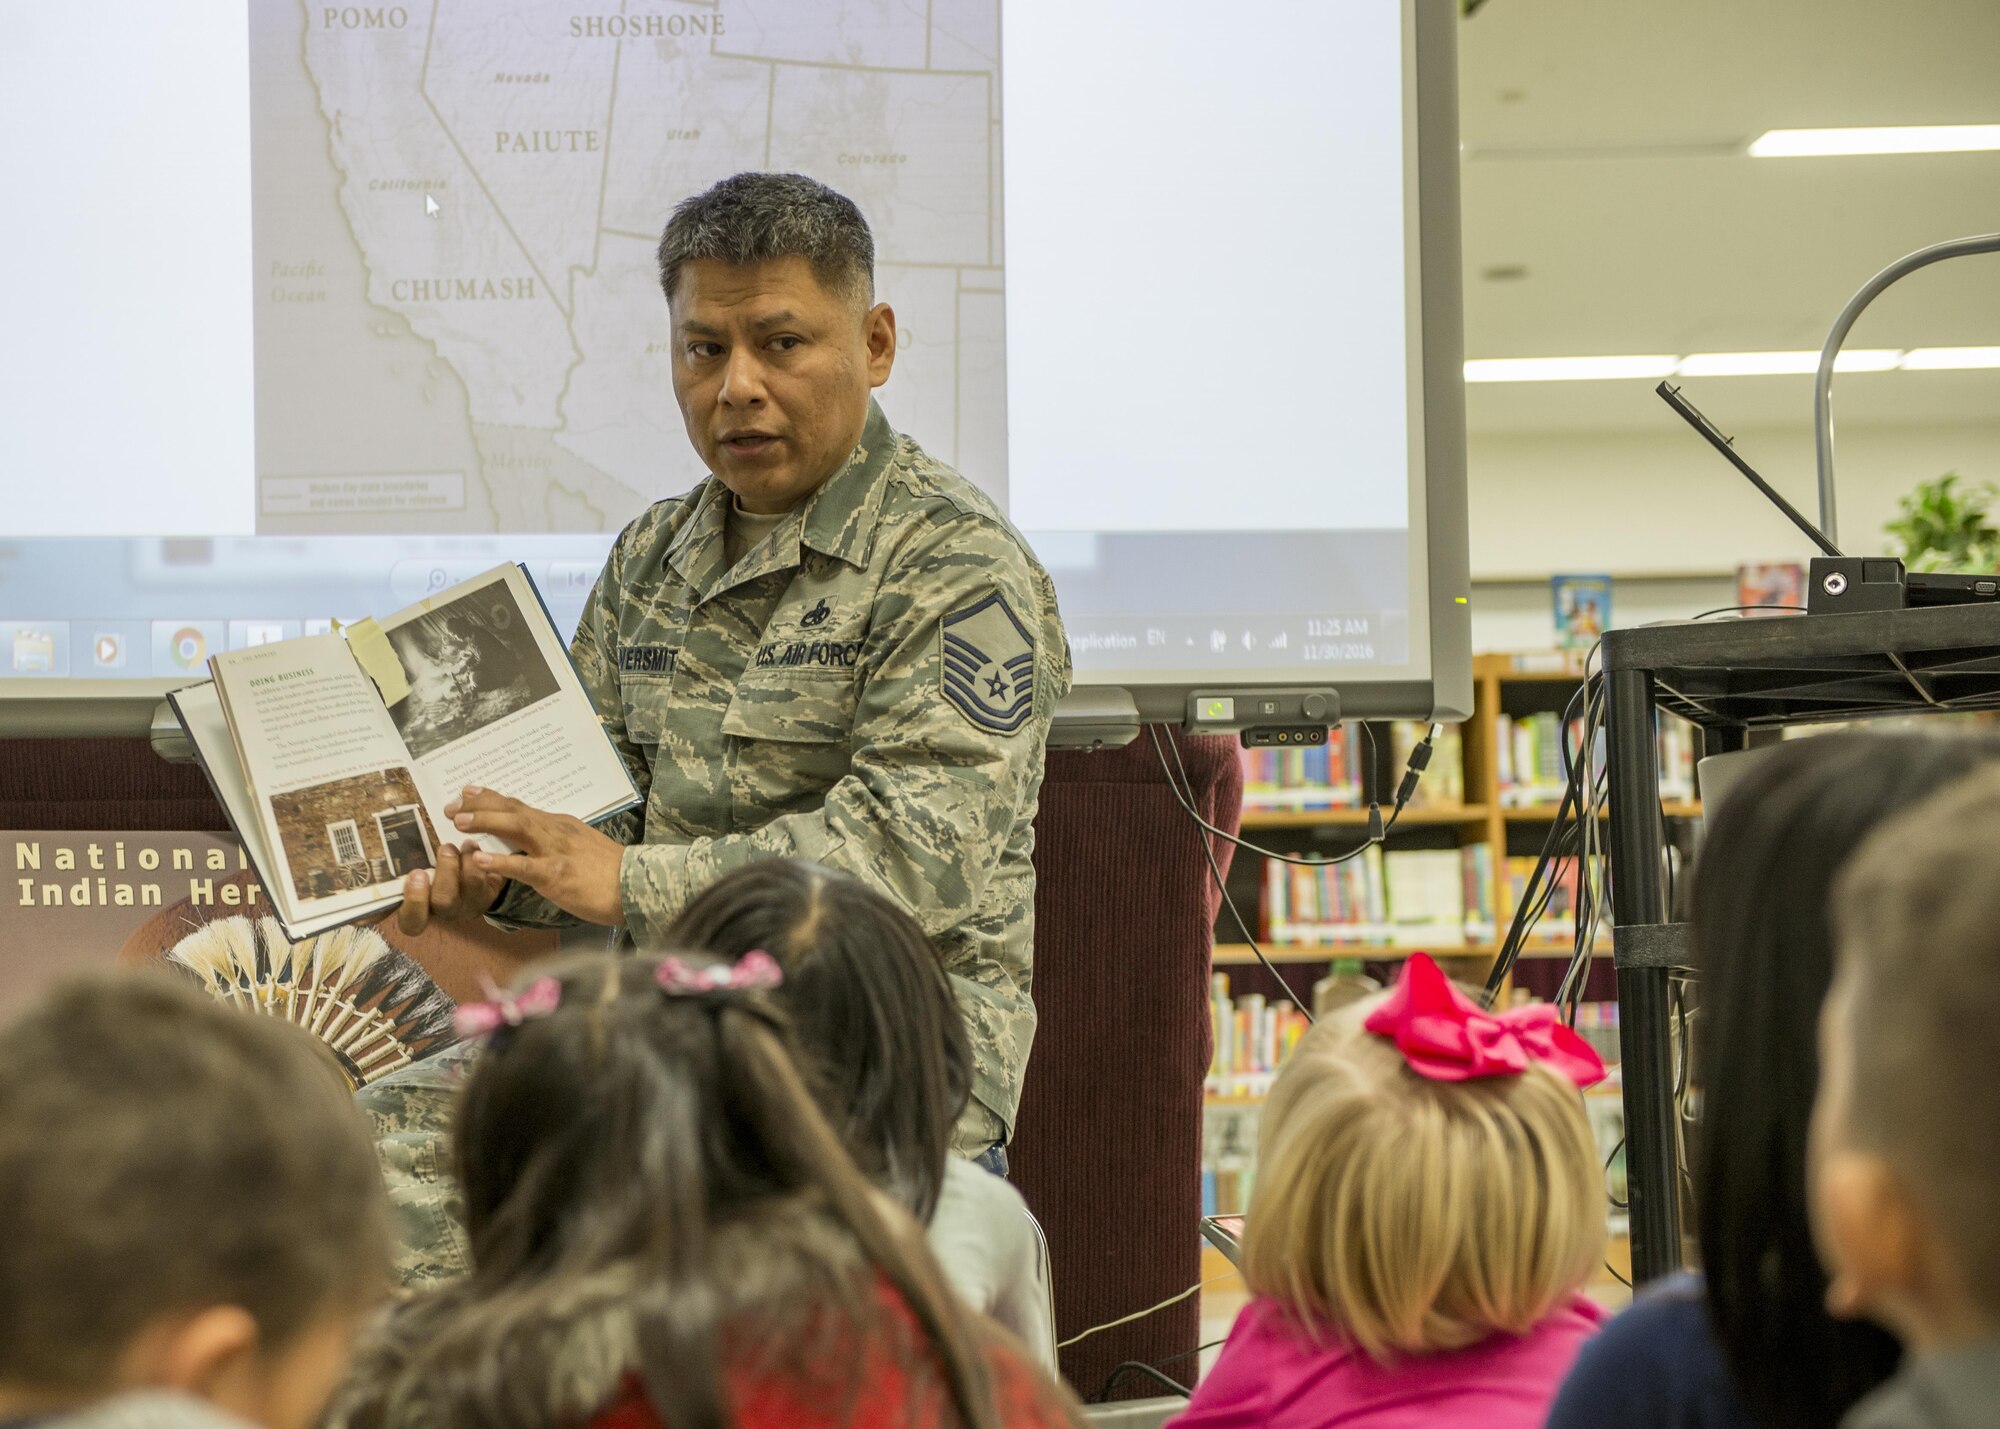 Master Sgt. Edward M. Silversmith, 374th Maintenance Squadron flight chief, reads to children at Mendel Elementary School during a National American Indian Heritage Month event on Nov. 30, 2016, at Yokota Air Base, Japan. Yokota’s NAIHM committee held more than 30 reading sessions at Yokota elementary schools. (U.S. Air Force photo by Airman 1st Class Donald Hudson)